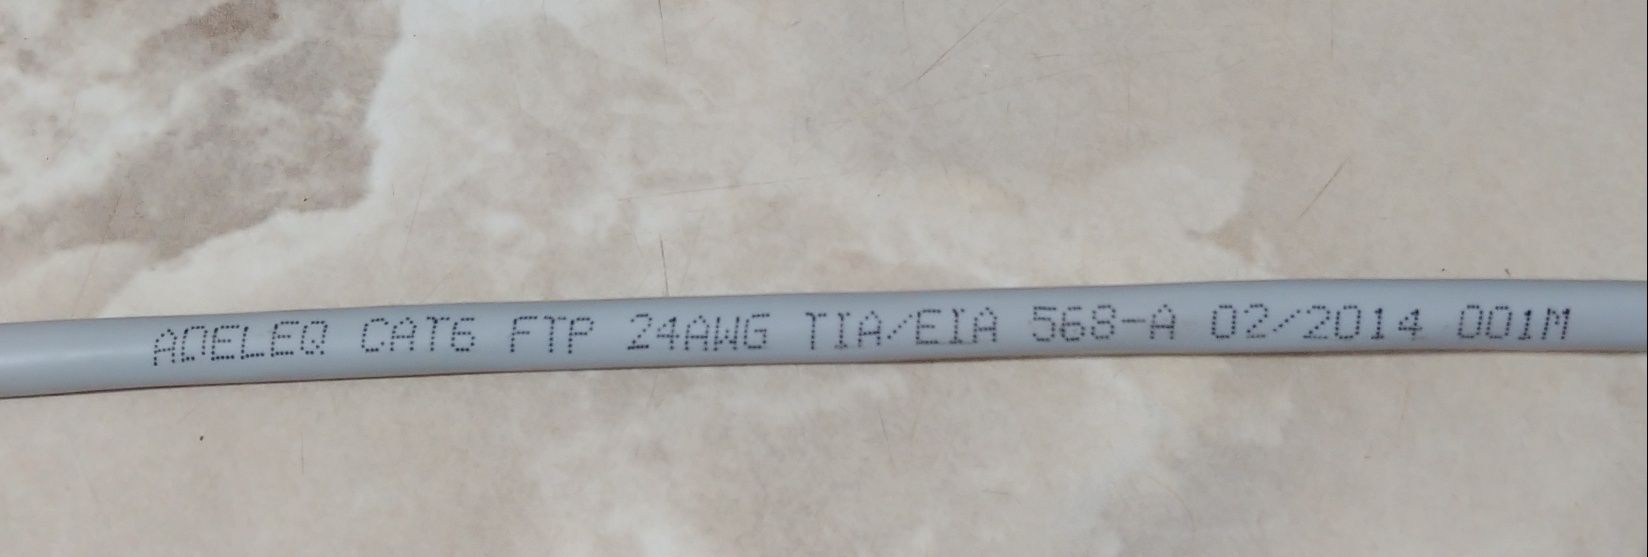 Cablu adeleq CAT6 FTP 24AWG